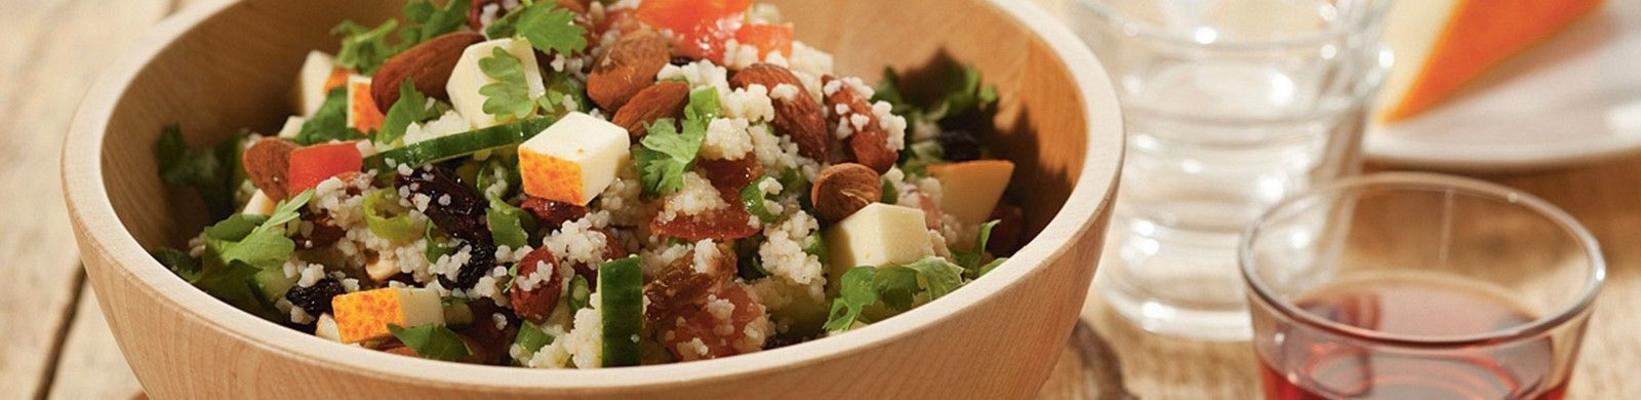 couscous salad with nuts and raisins